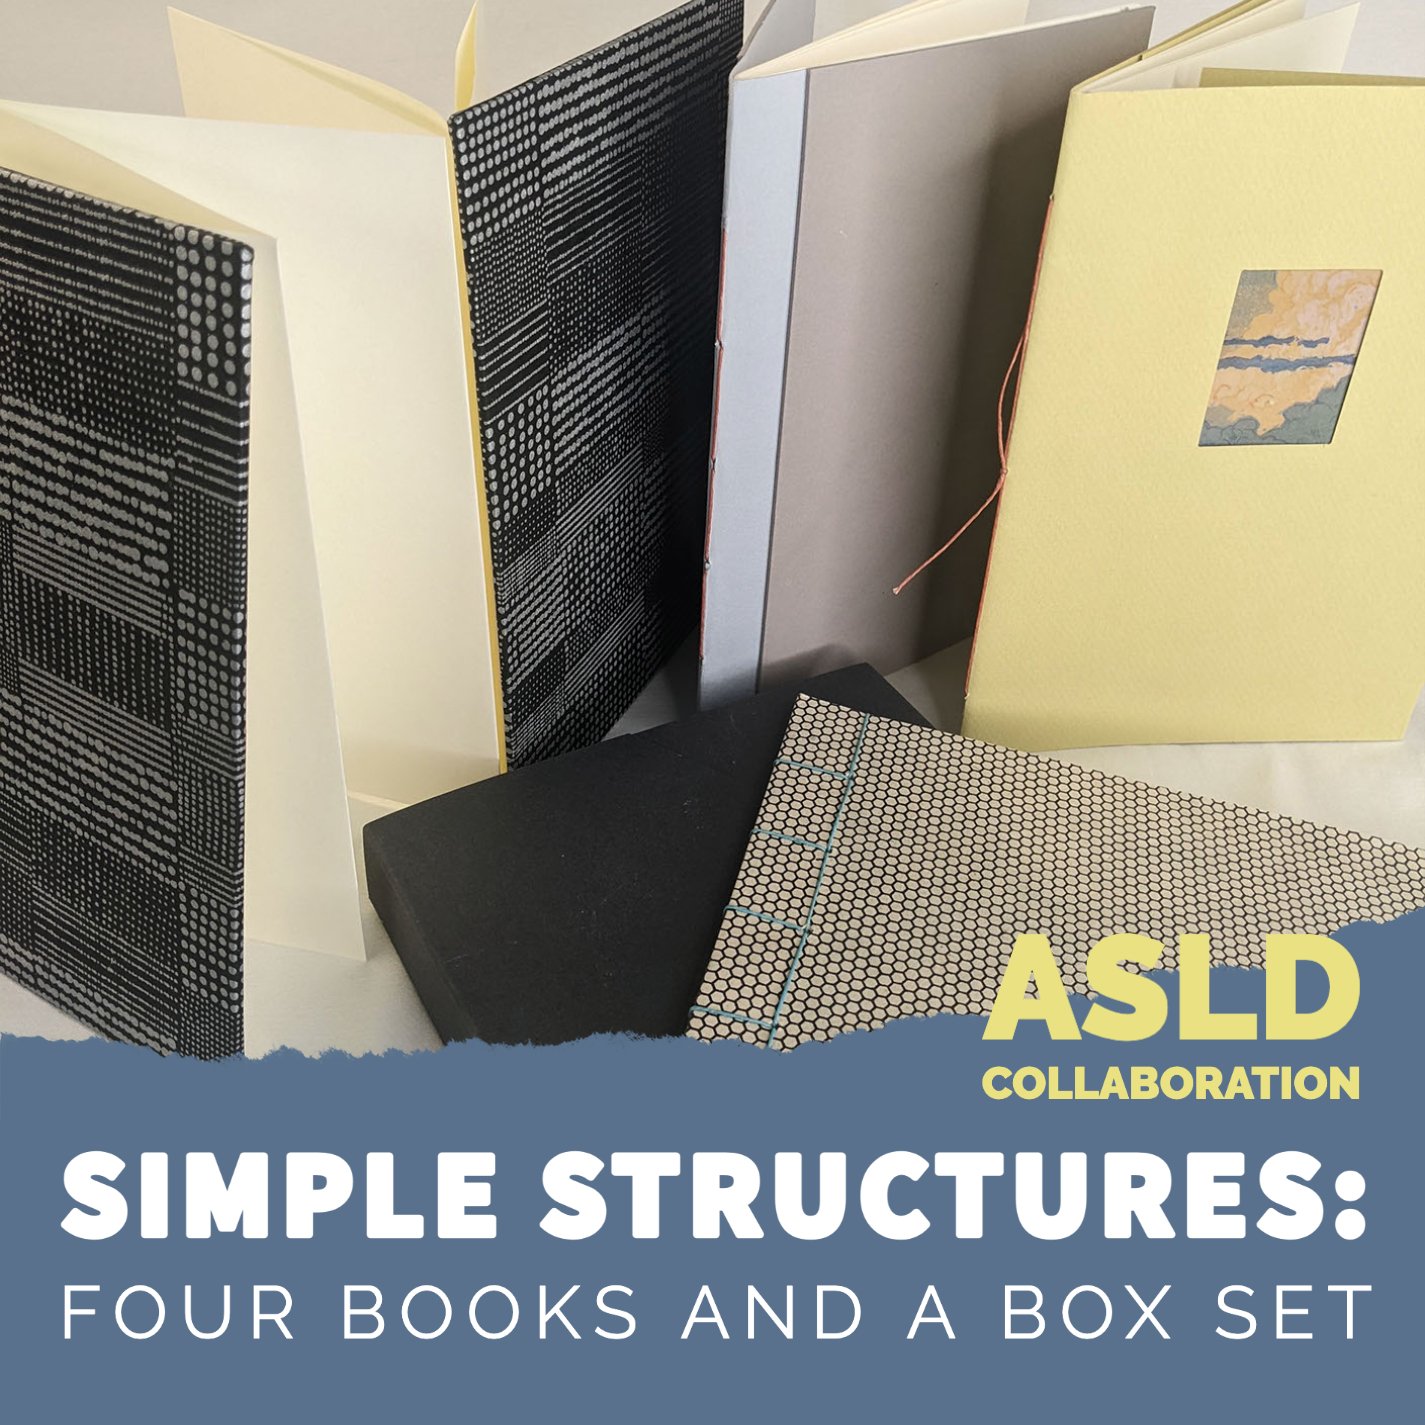 Easy Beginner Bookbinding Ideas for Groups, Kids and More